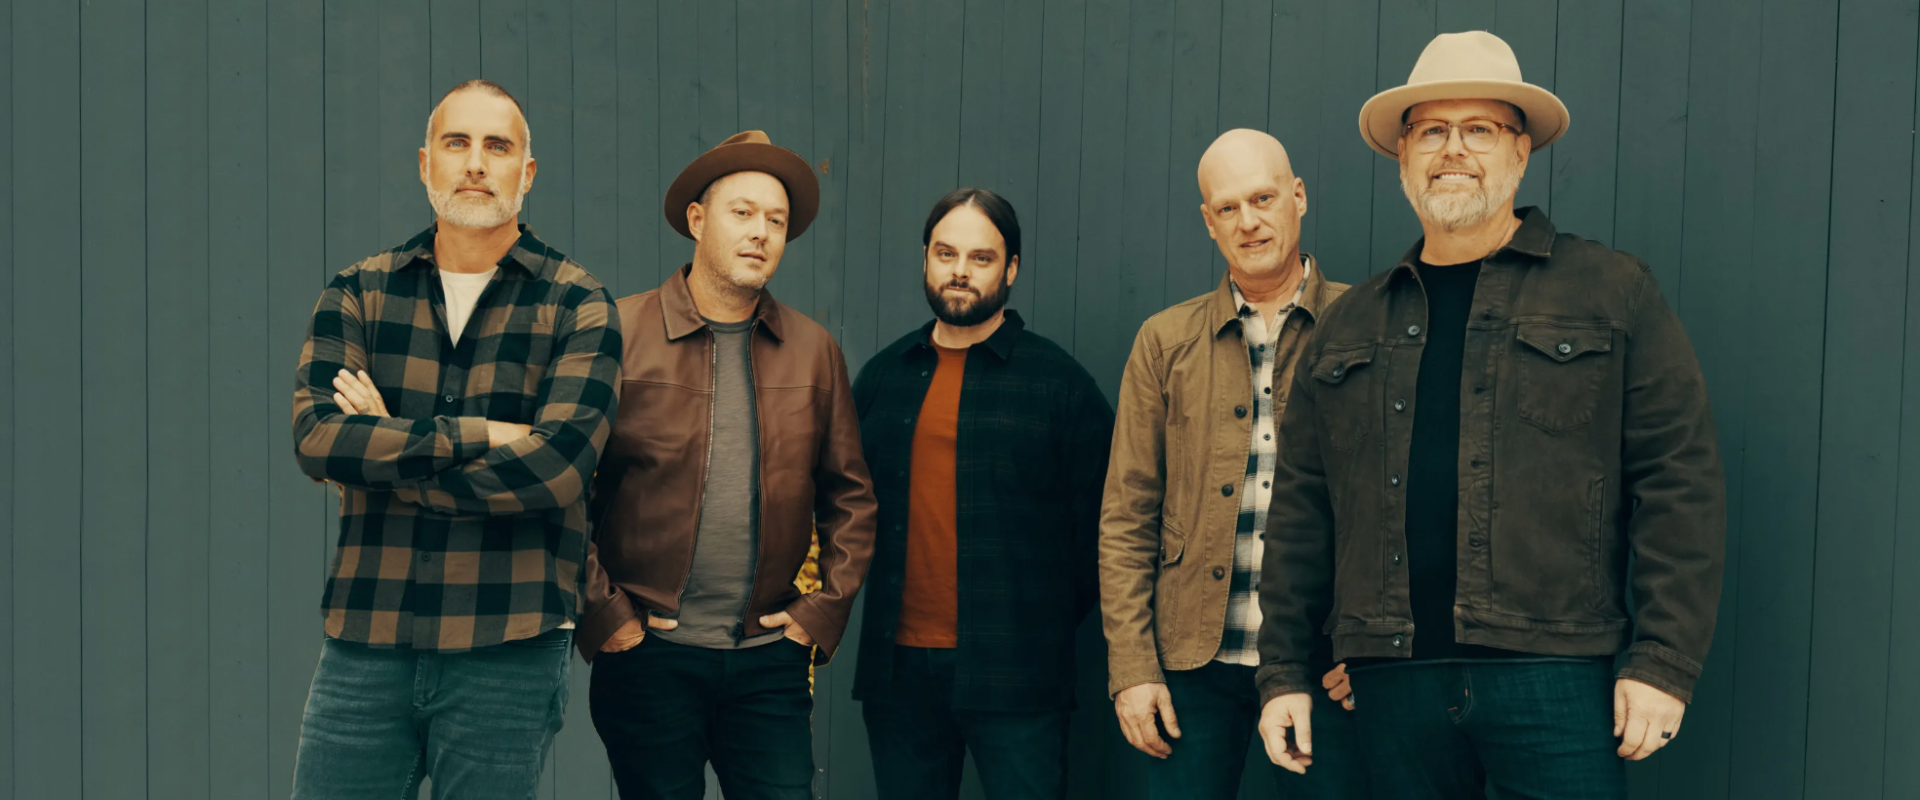 MercyMe Will Celebrate 30 Years Of Christian Music Ministry Next Year